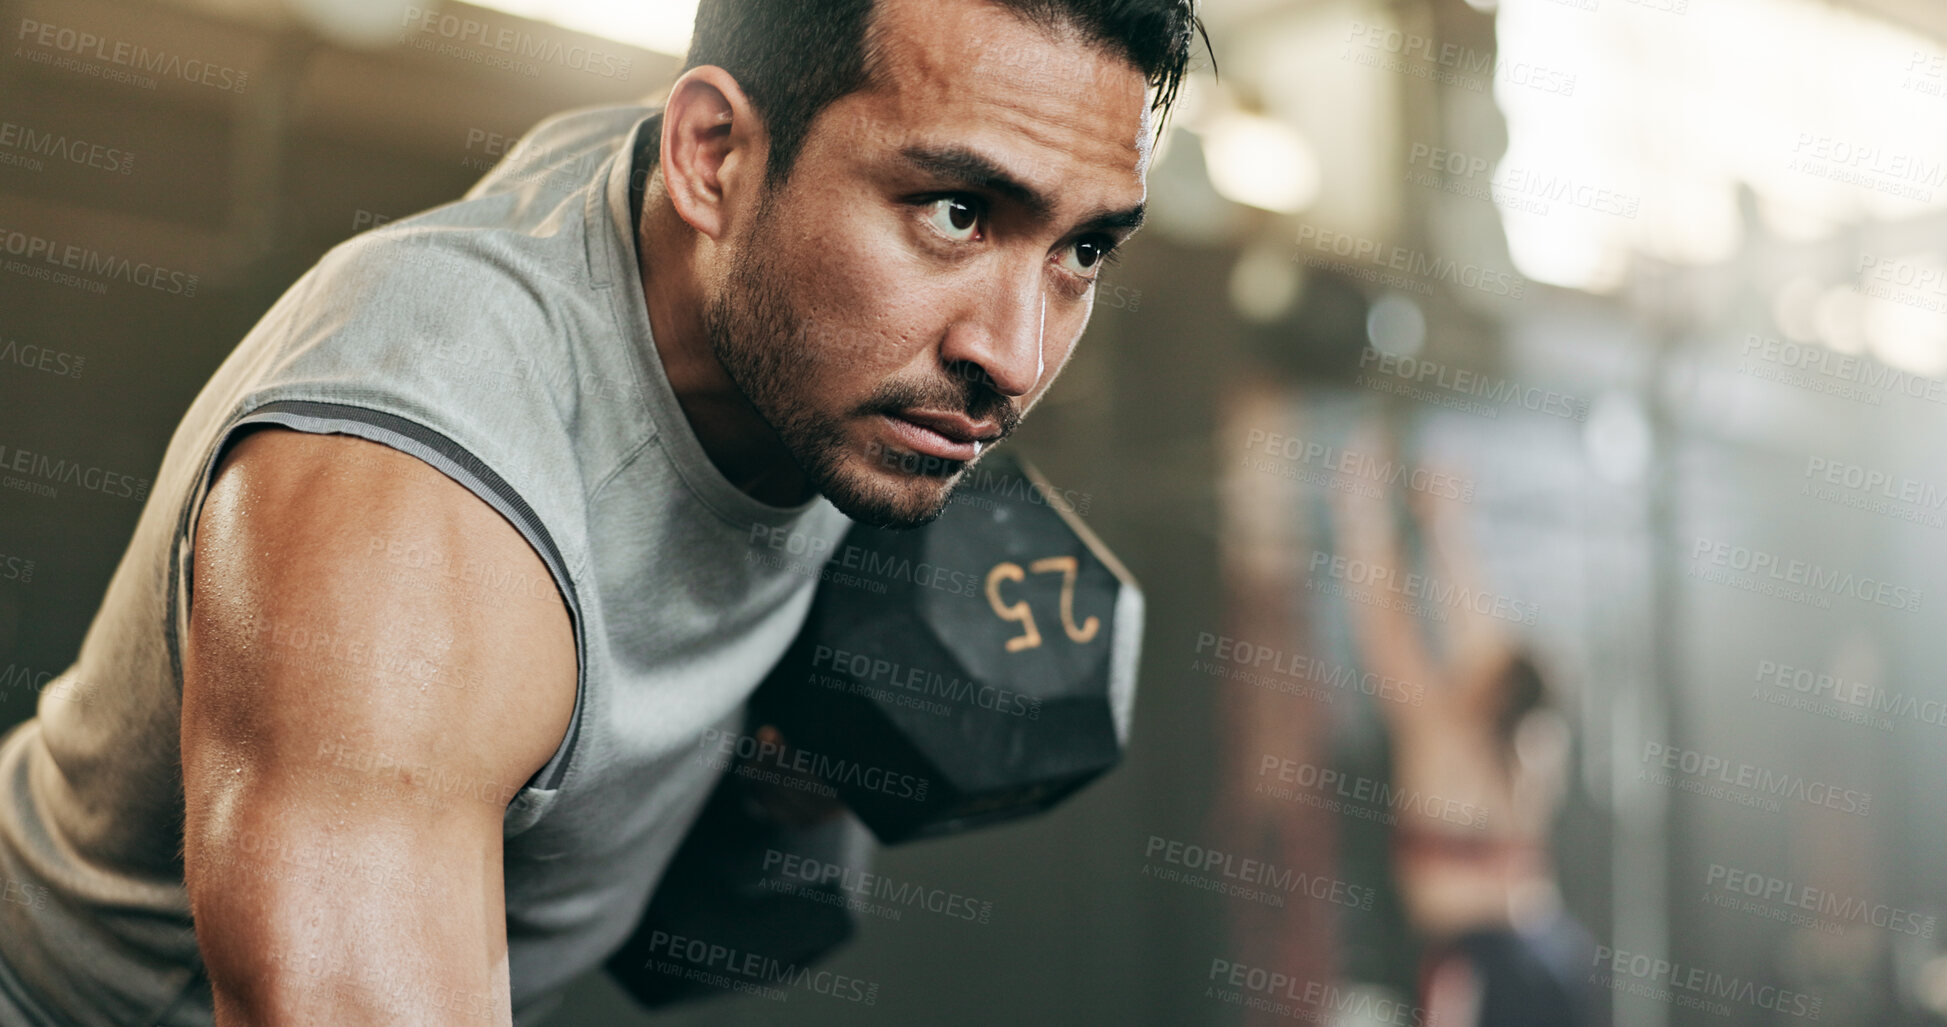 Buy stock photo Serious man, dumbbell and weightlifting in workout, exercise or fitness at indoor gym. Active male person, bodybuilder or athlete lifting weight for intense arm training, strength or muscle at club